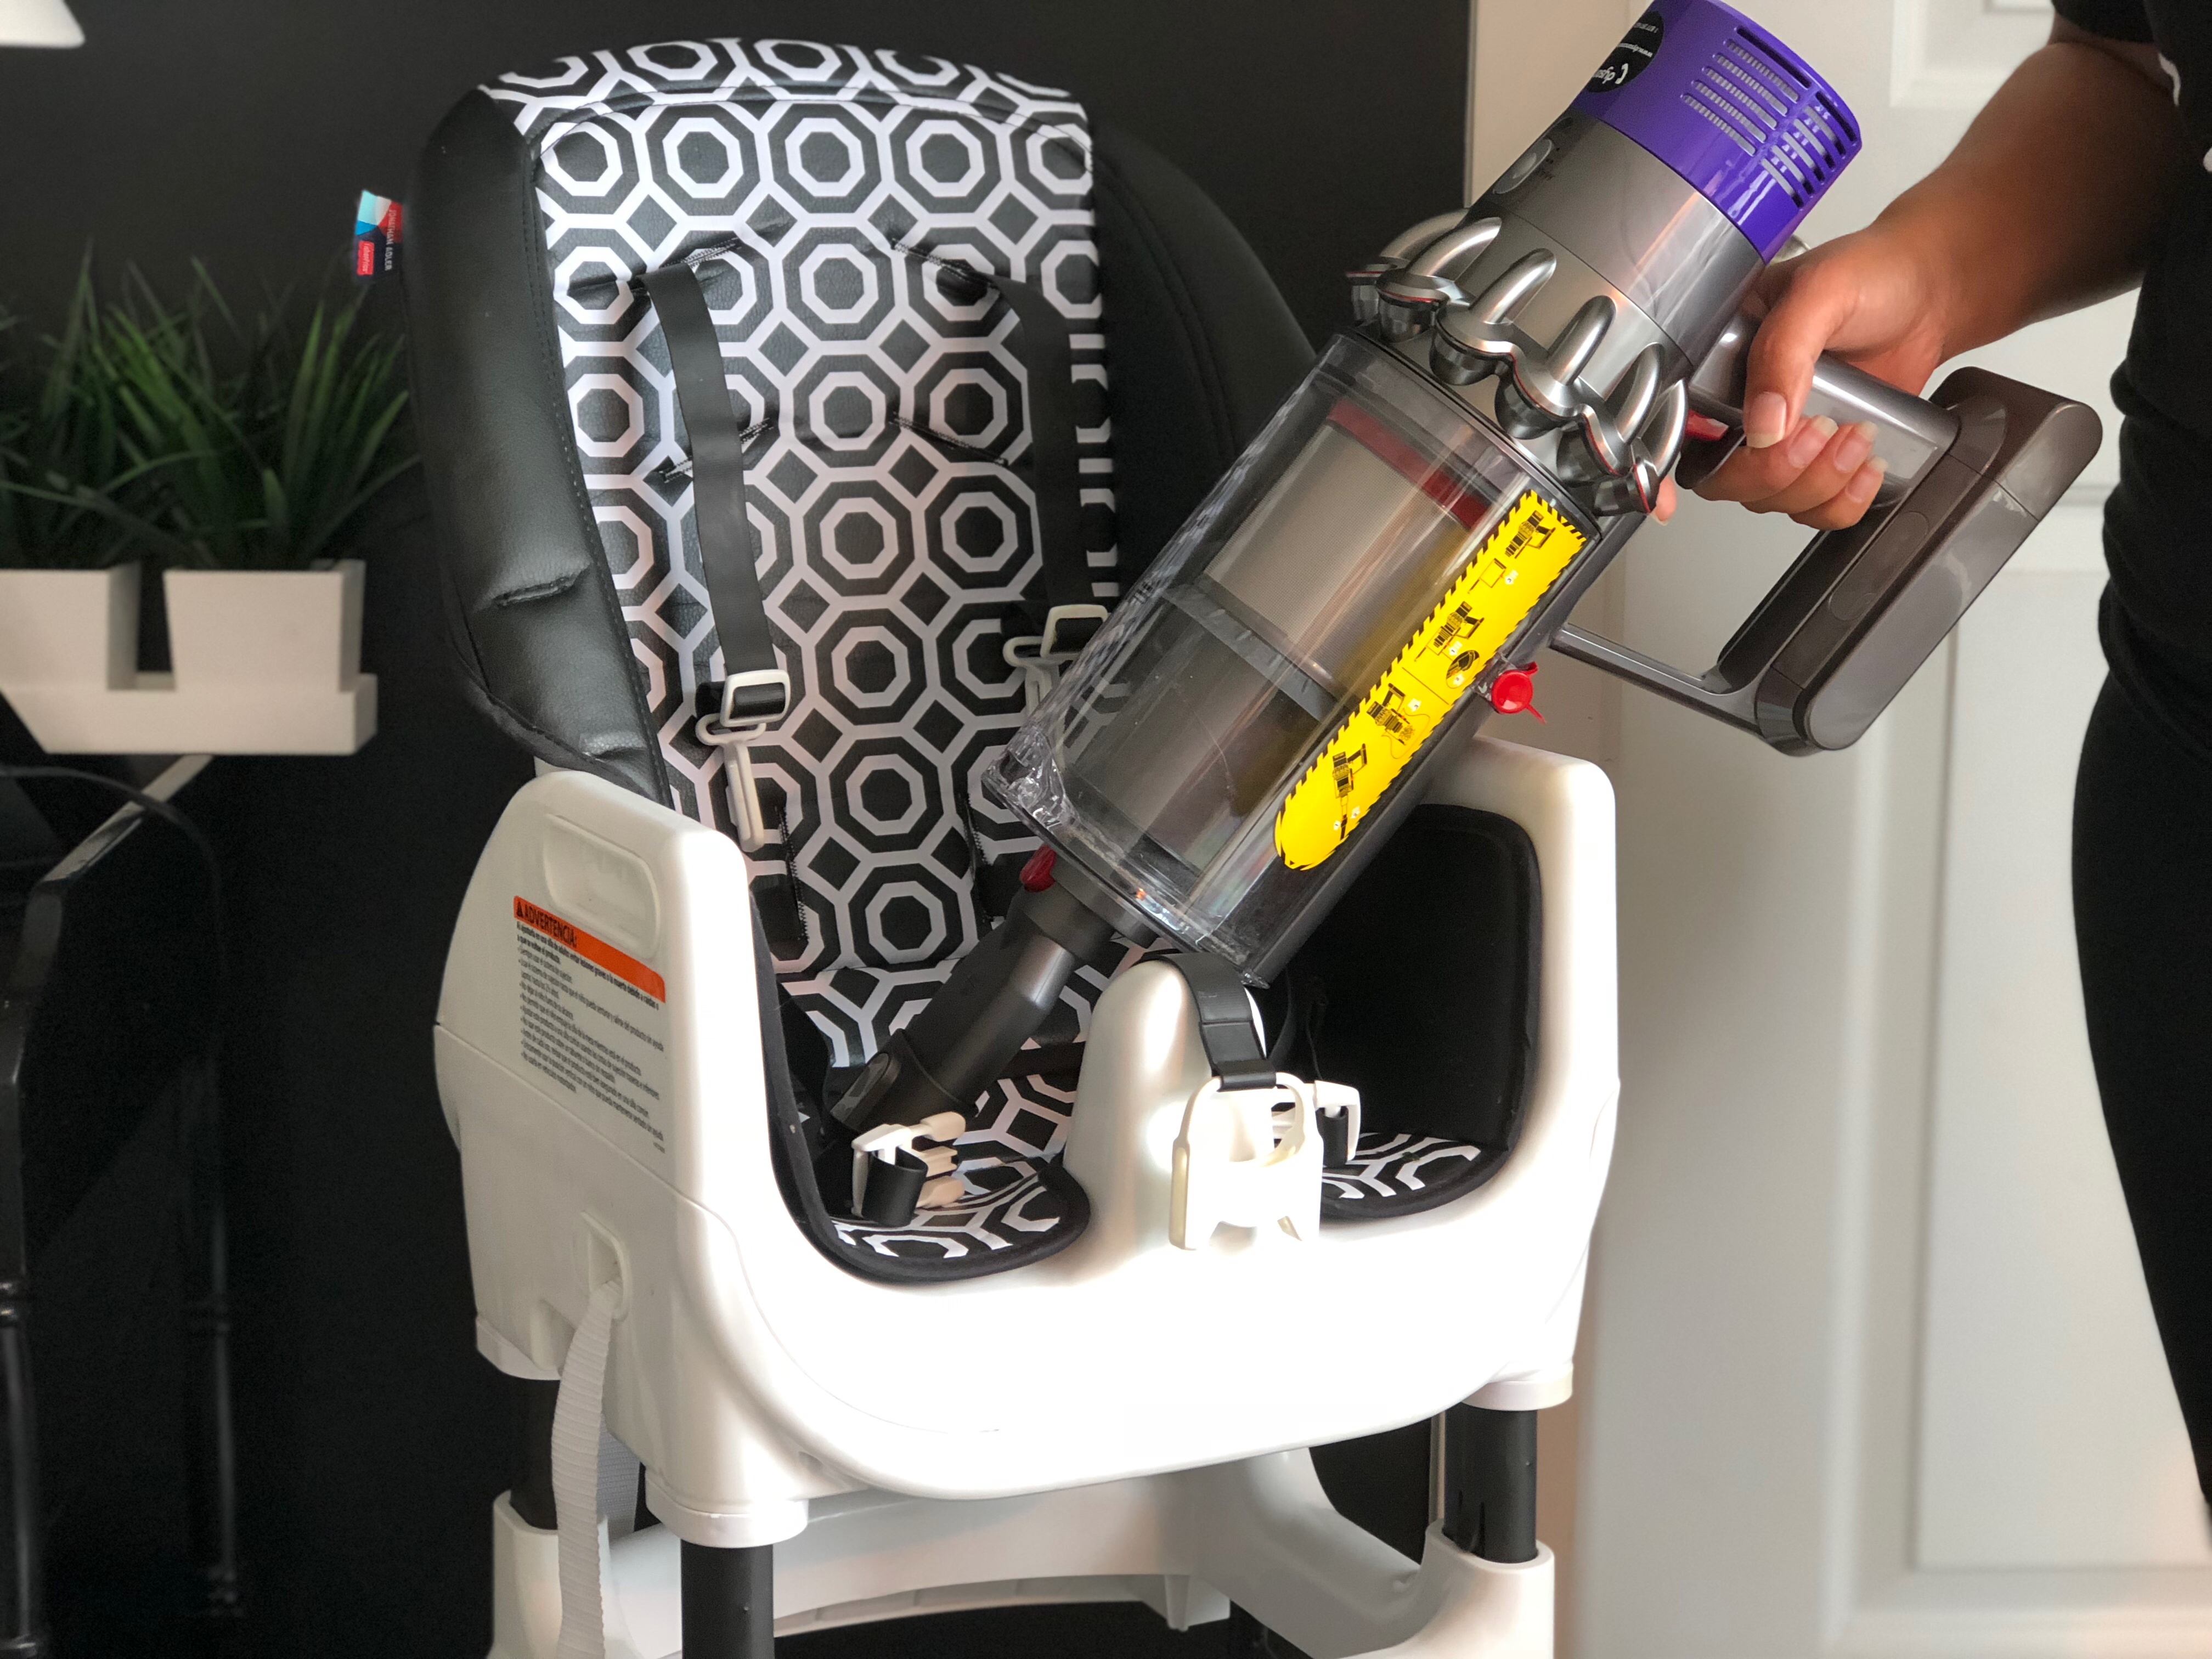 Review: Dyson Cyclone V10 Absolute Vacuum